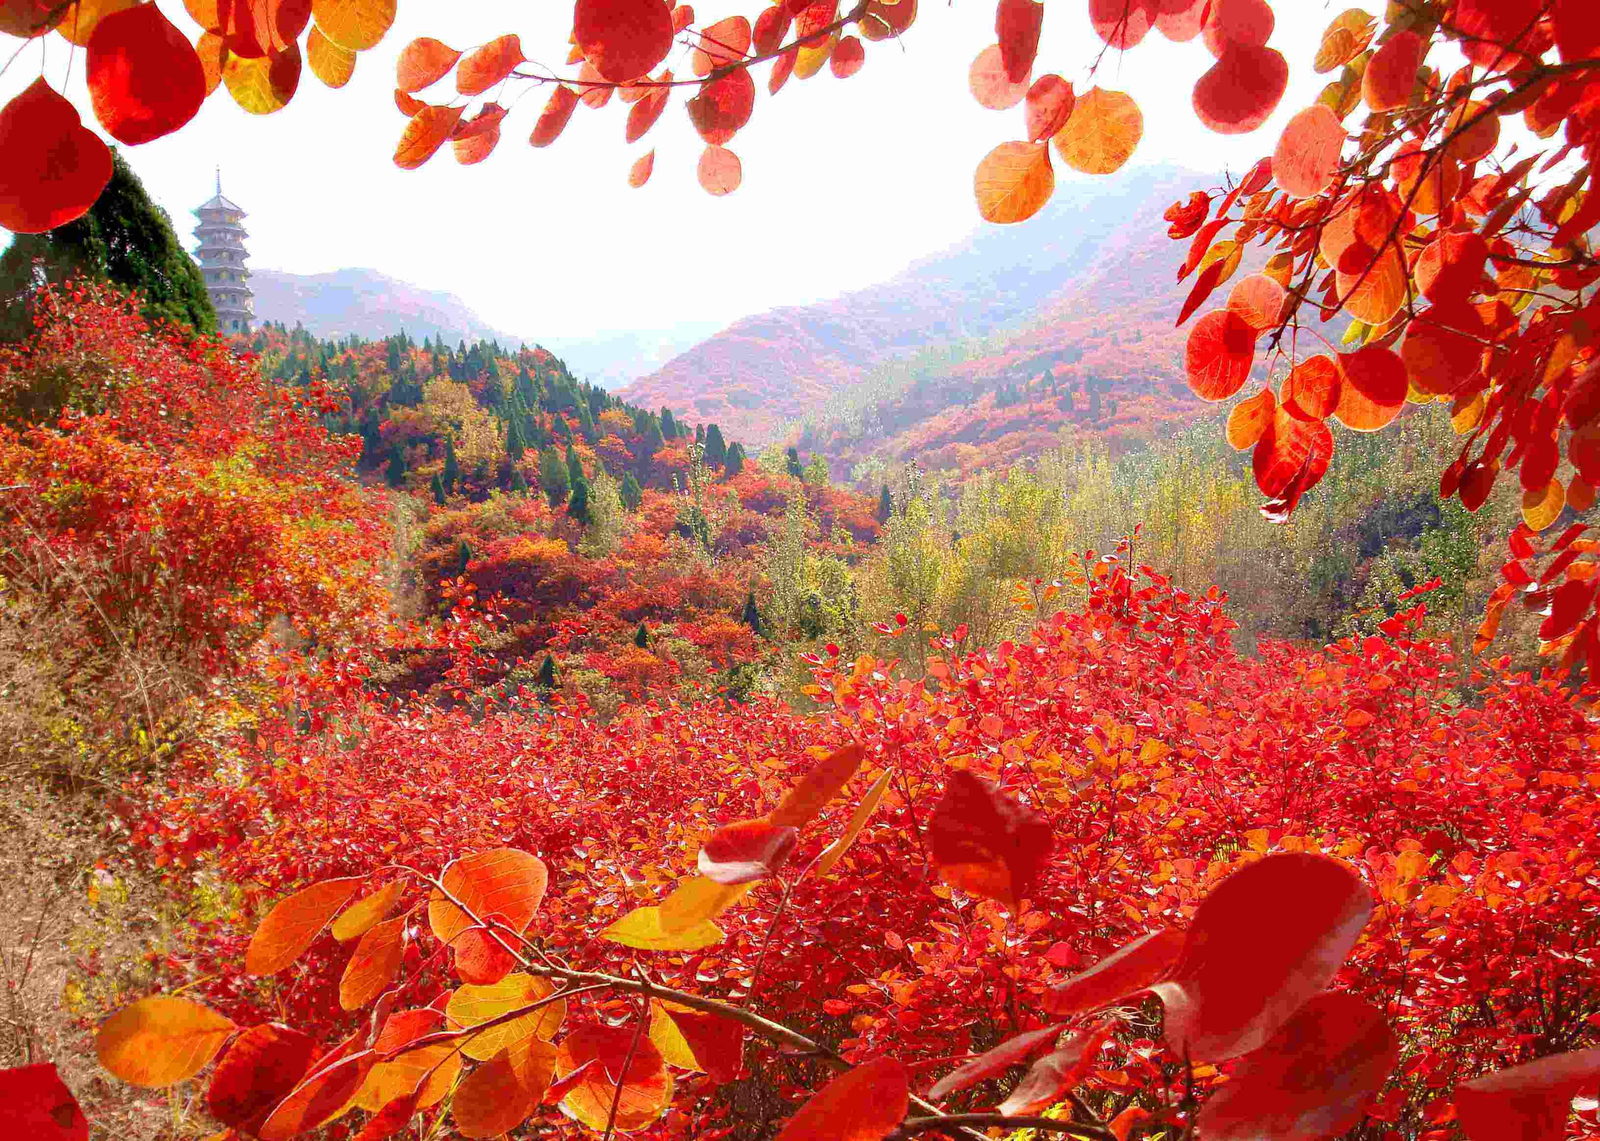 Autumn in China - China, Autumn, Leaves, Nature, The park, Landscape